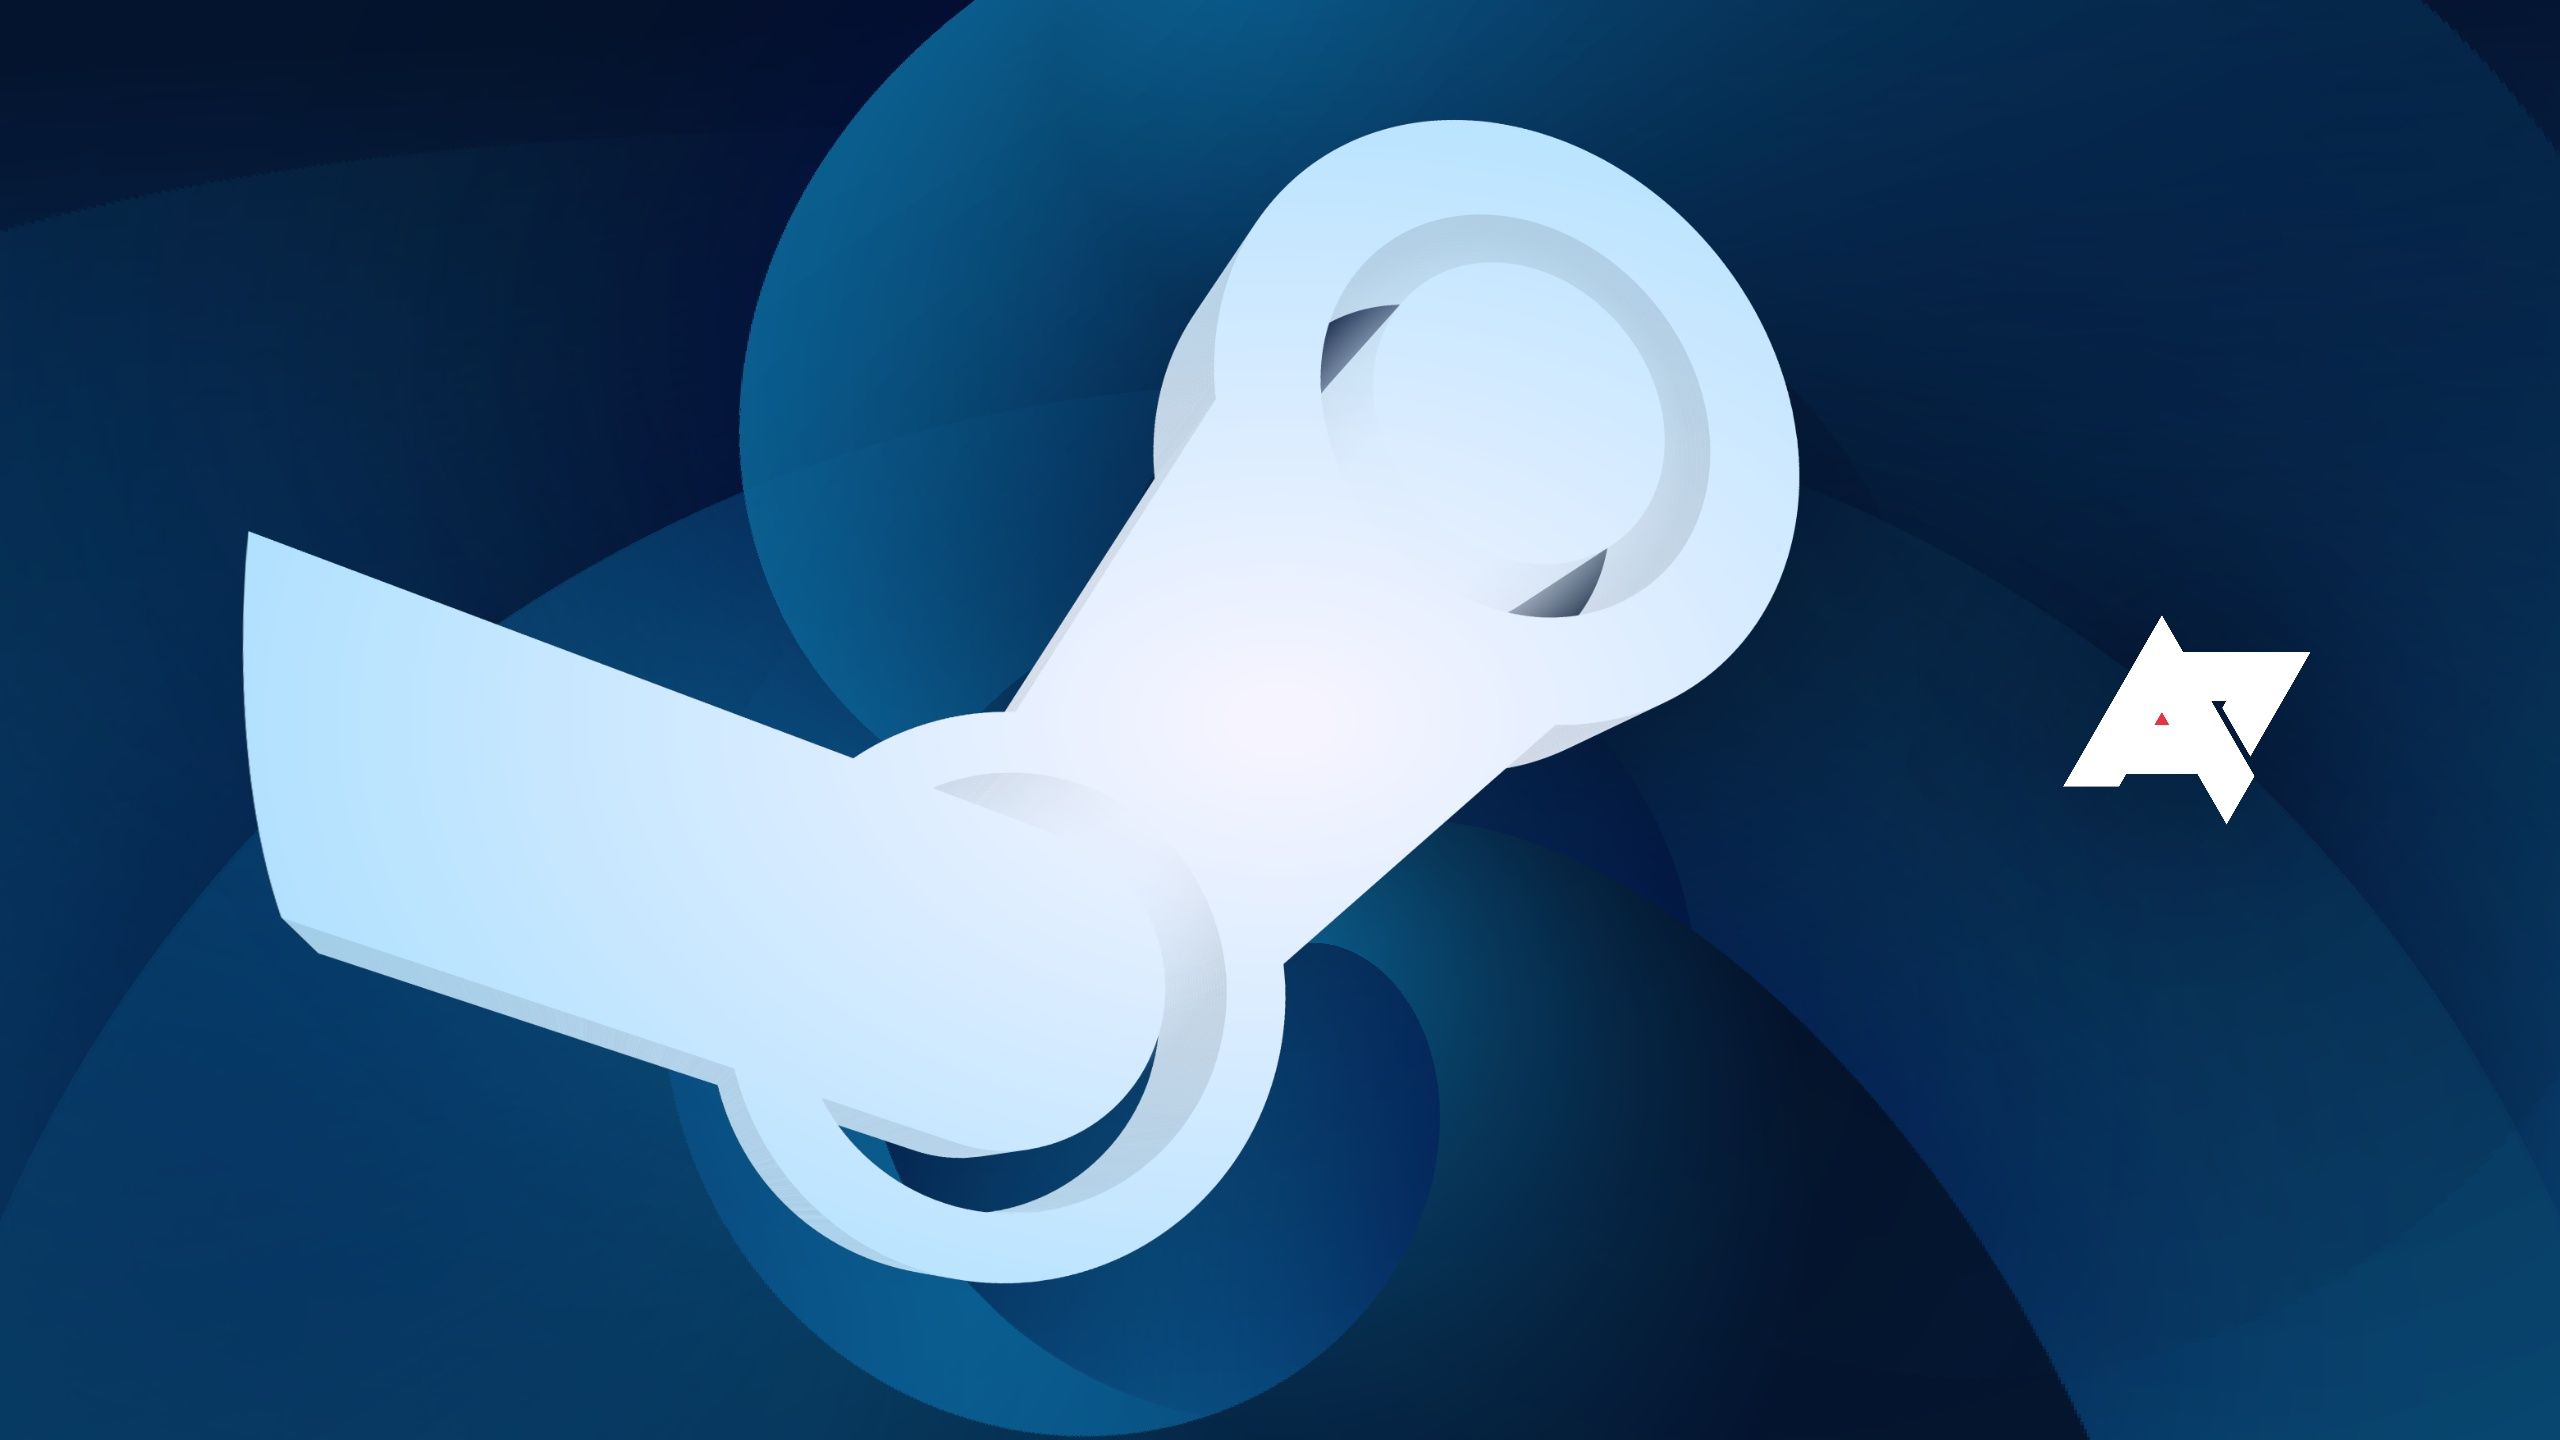 steam logo duplicated over dark navy background with white AP logo on rightside